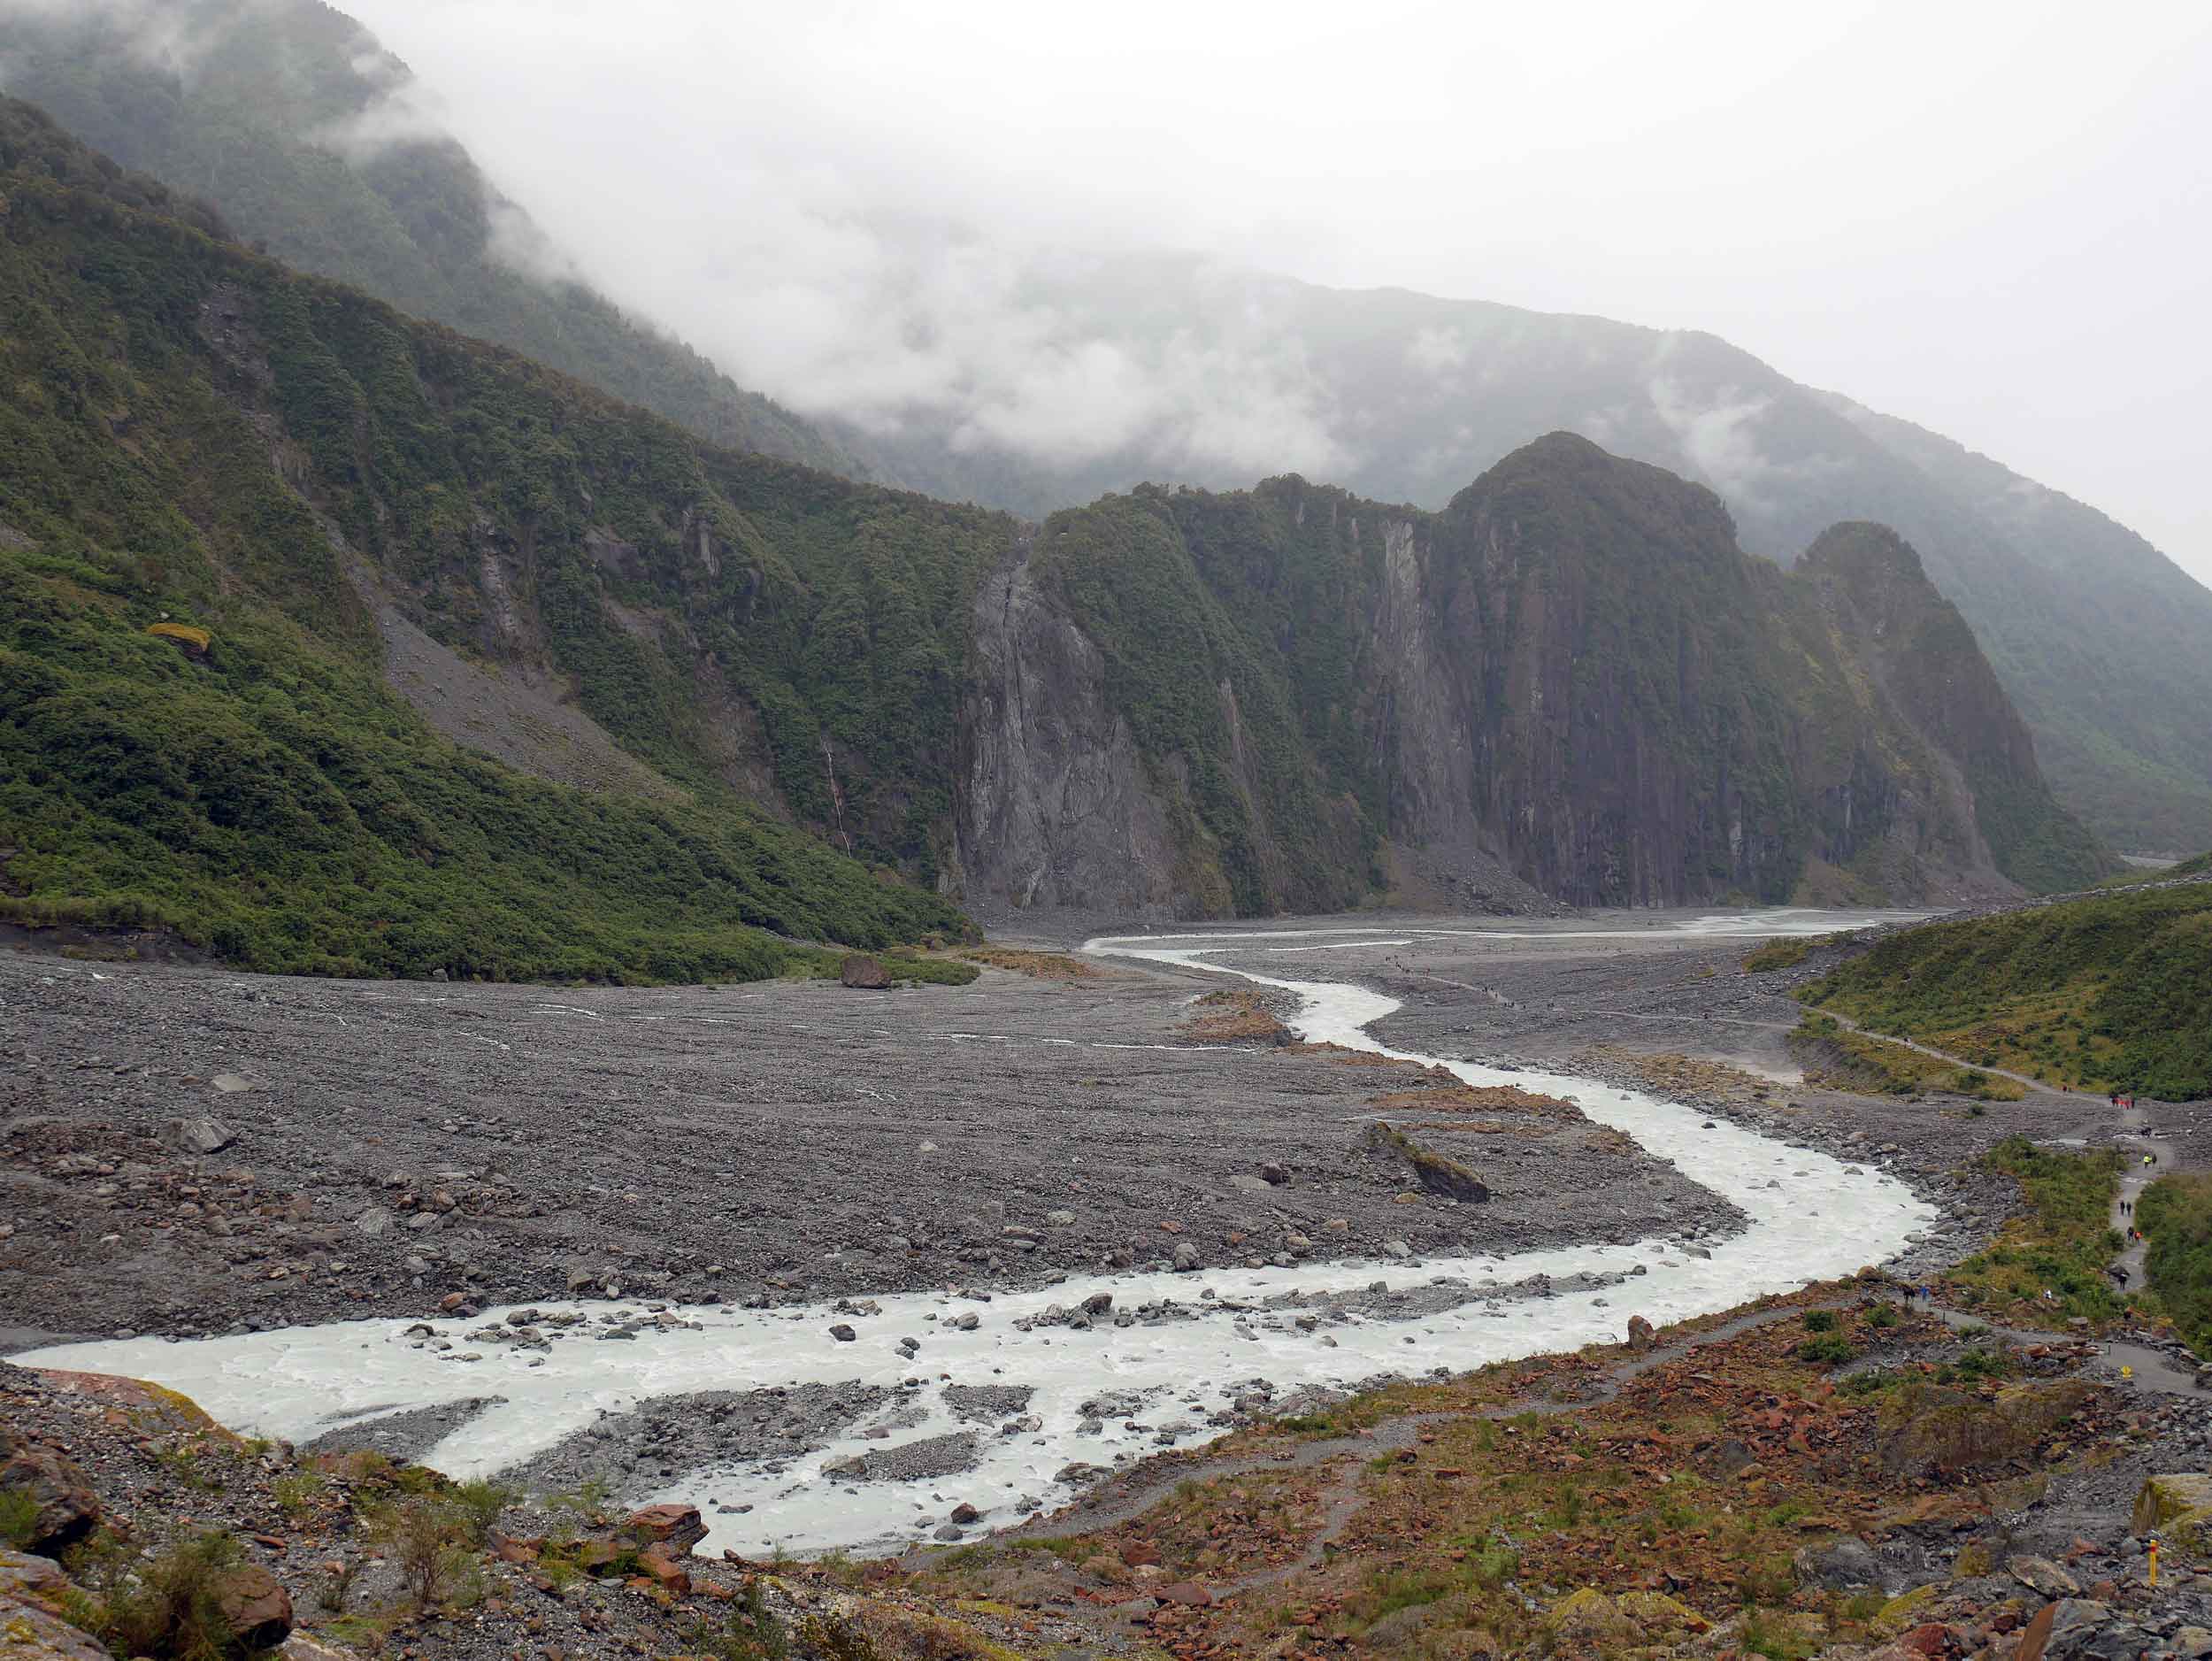  The outflow of Fox Glacier forms the Fox River that runs through the glacier valley to the coast (Jan 6).&nbsp; 